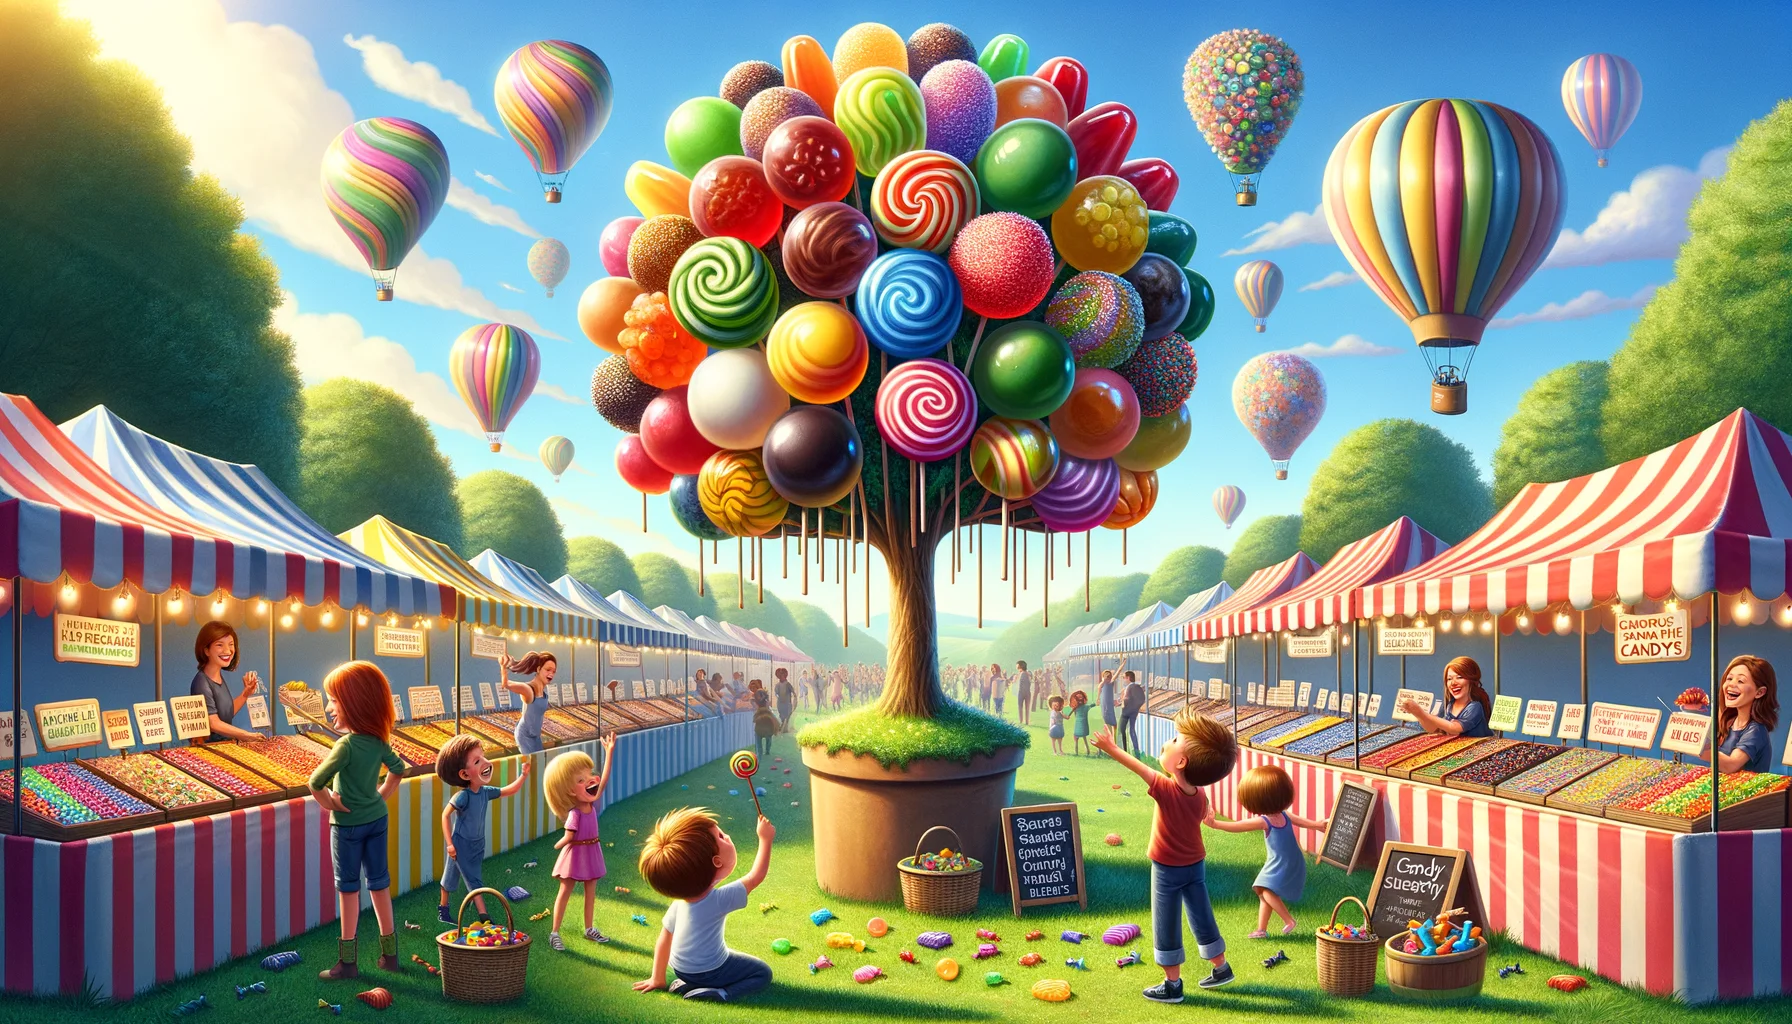 Imagine a humorous and realistic illustration of a world where plant-based natural sweetener candies are the ultimate joy. Picture this: a sunny outdoor farmers market where an array of colorful stalls sell an exciting variety of plant-based candies. One stall stands out with its unique 'rainbow candy tree', bearing candies of all flavors, attracting a happy crowd with a diverse bag of candies in their hands. In the background, a candy-shaped hot air balloon gently floats in the clear blue sky, while a candy-making workshop for kids is about to start on the green grass nearby. The atmosphere is light-hearted and filled with joy, making this the most perfect scenario for natural sweetener candies.